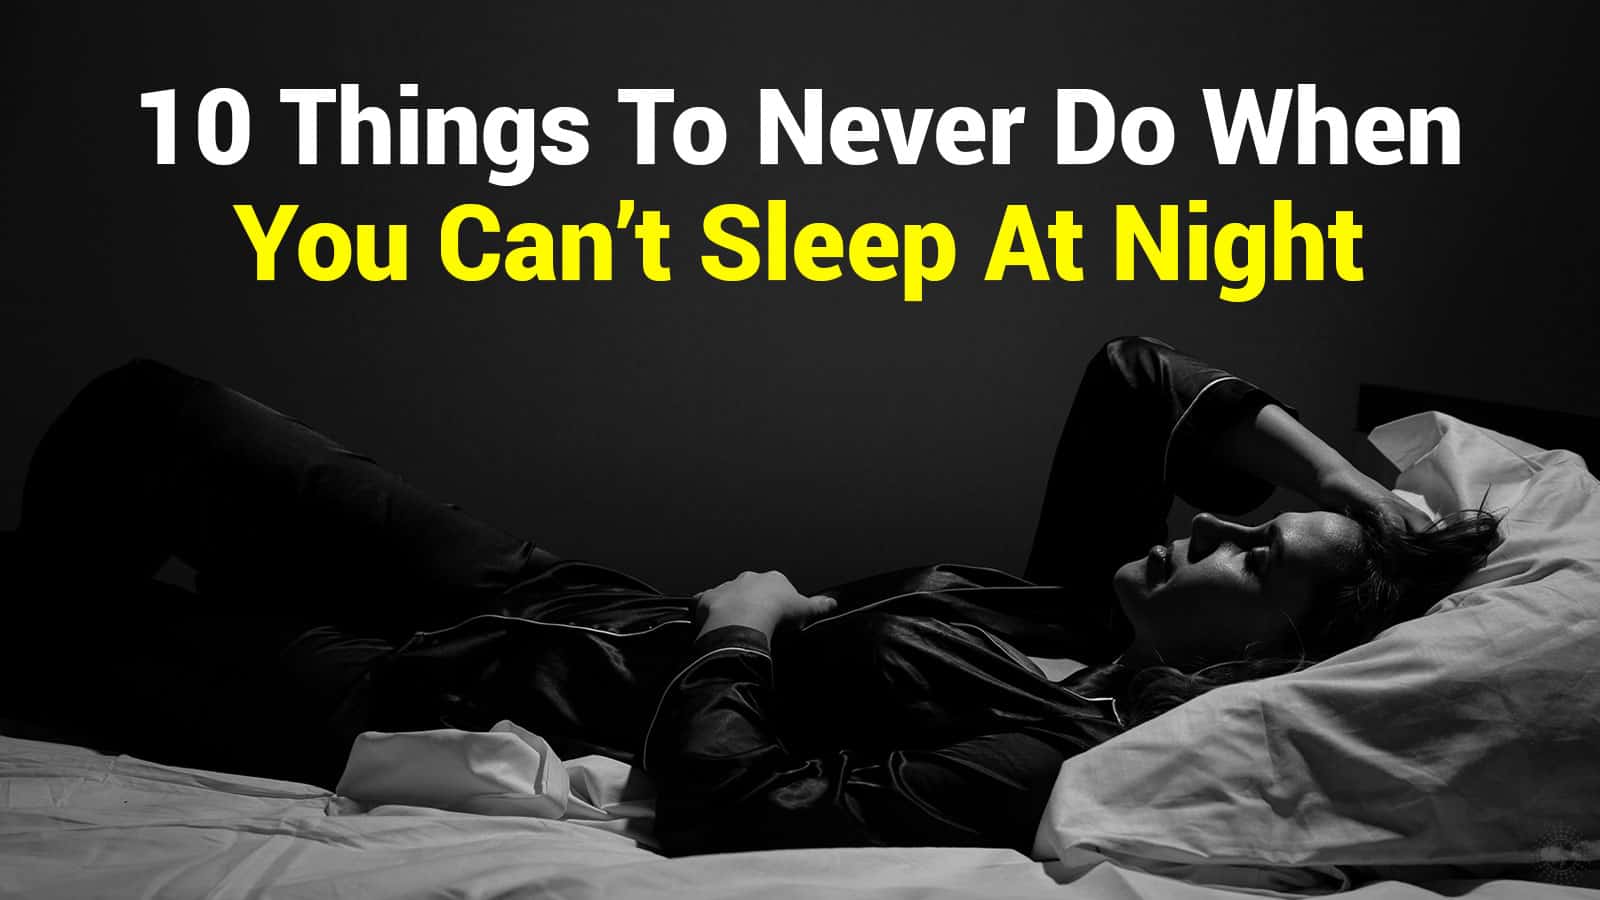 10 Things To Never Do When You Can’t Sleep At Night